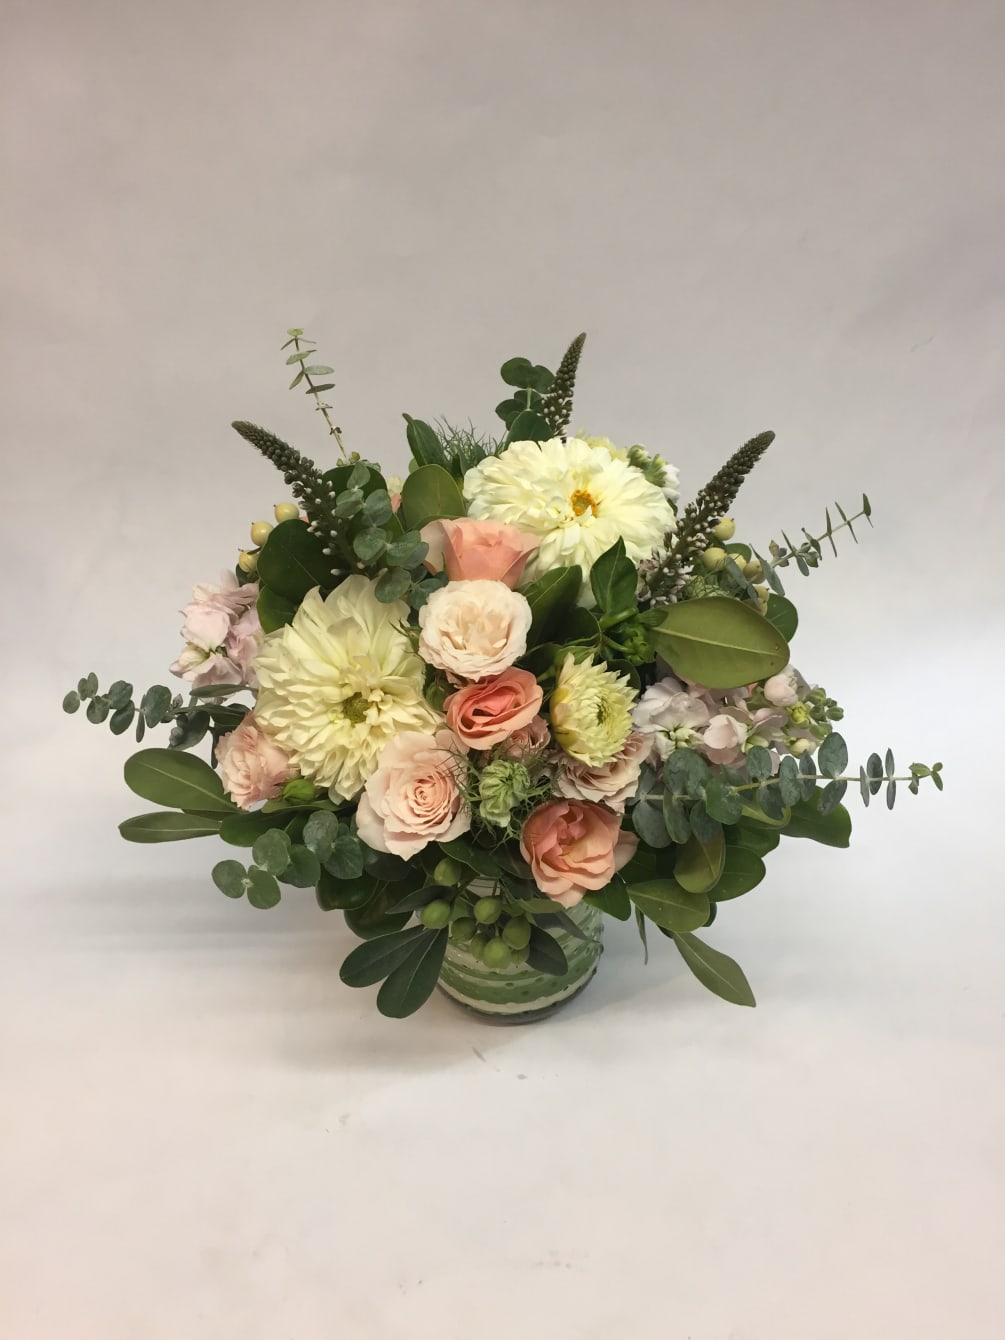 This low arrangement comes complete with light pink spray roses, white dahlias